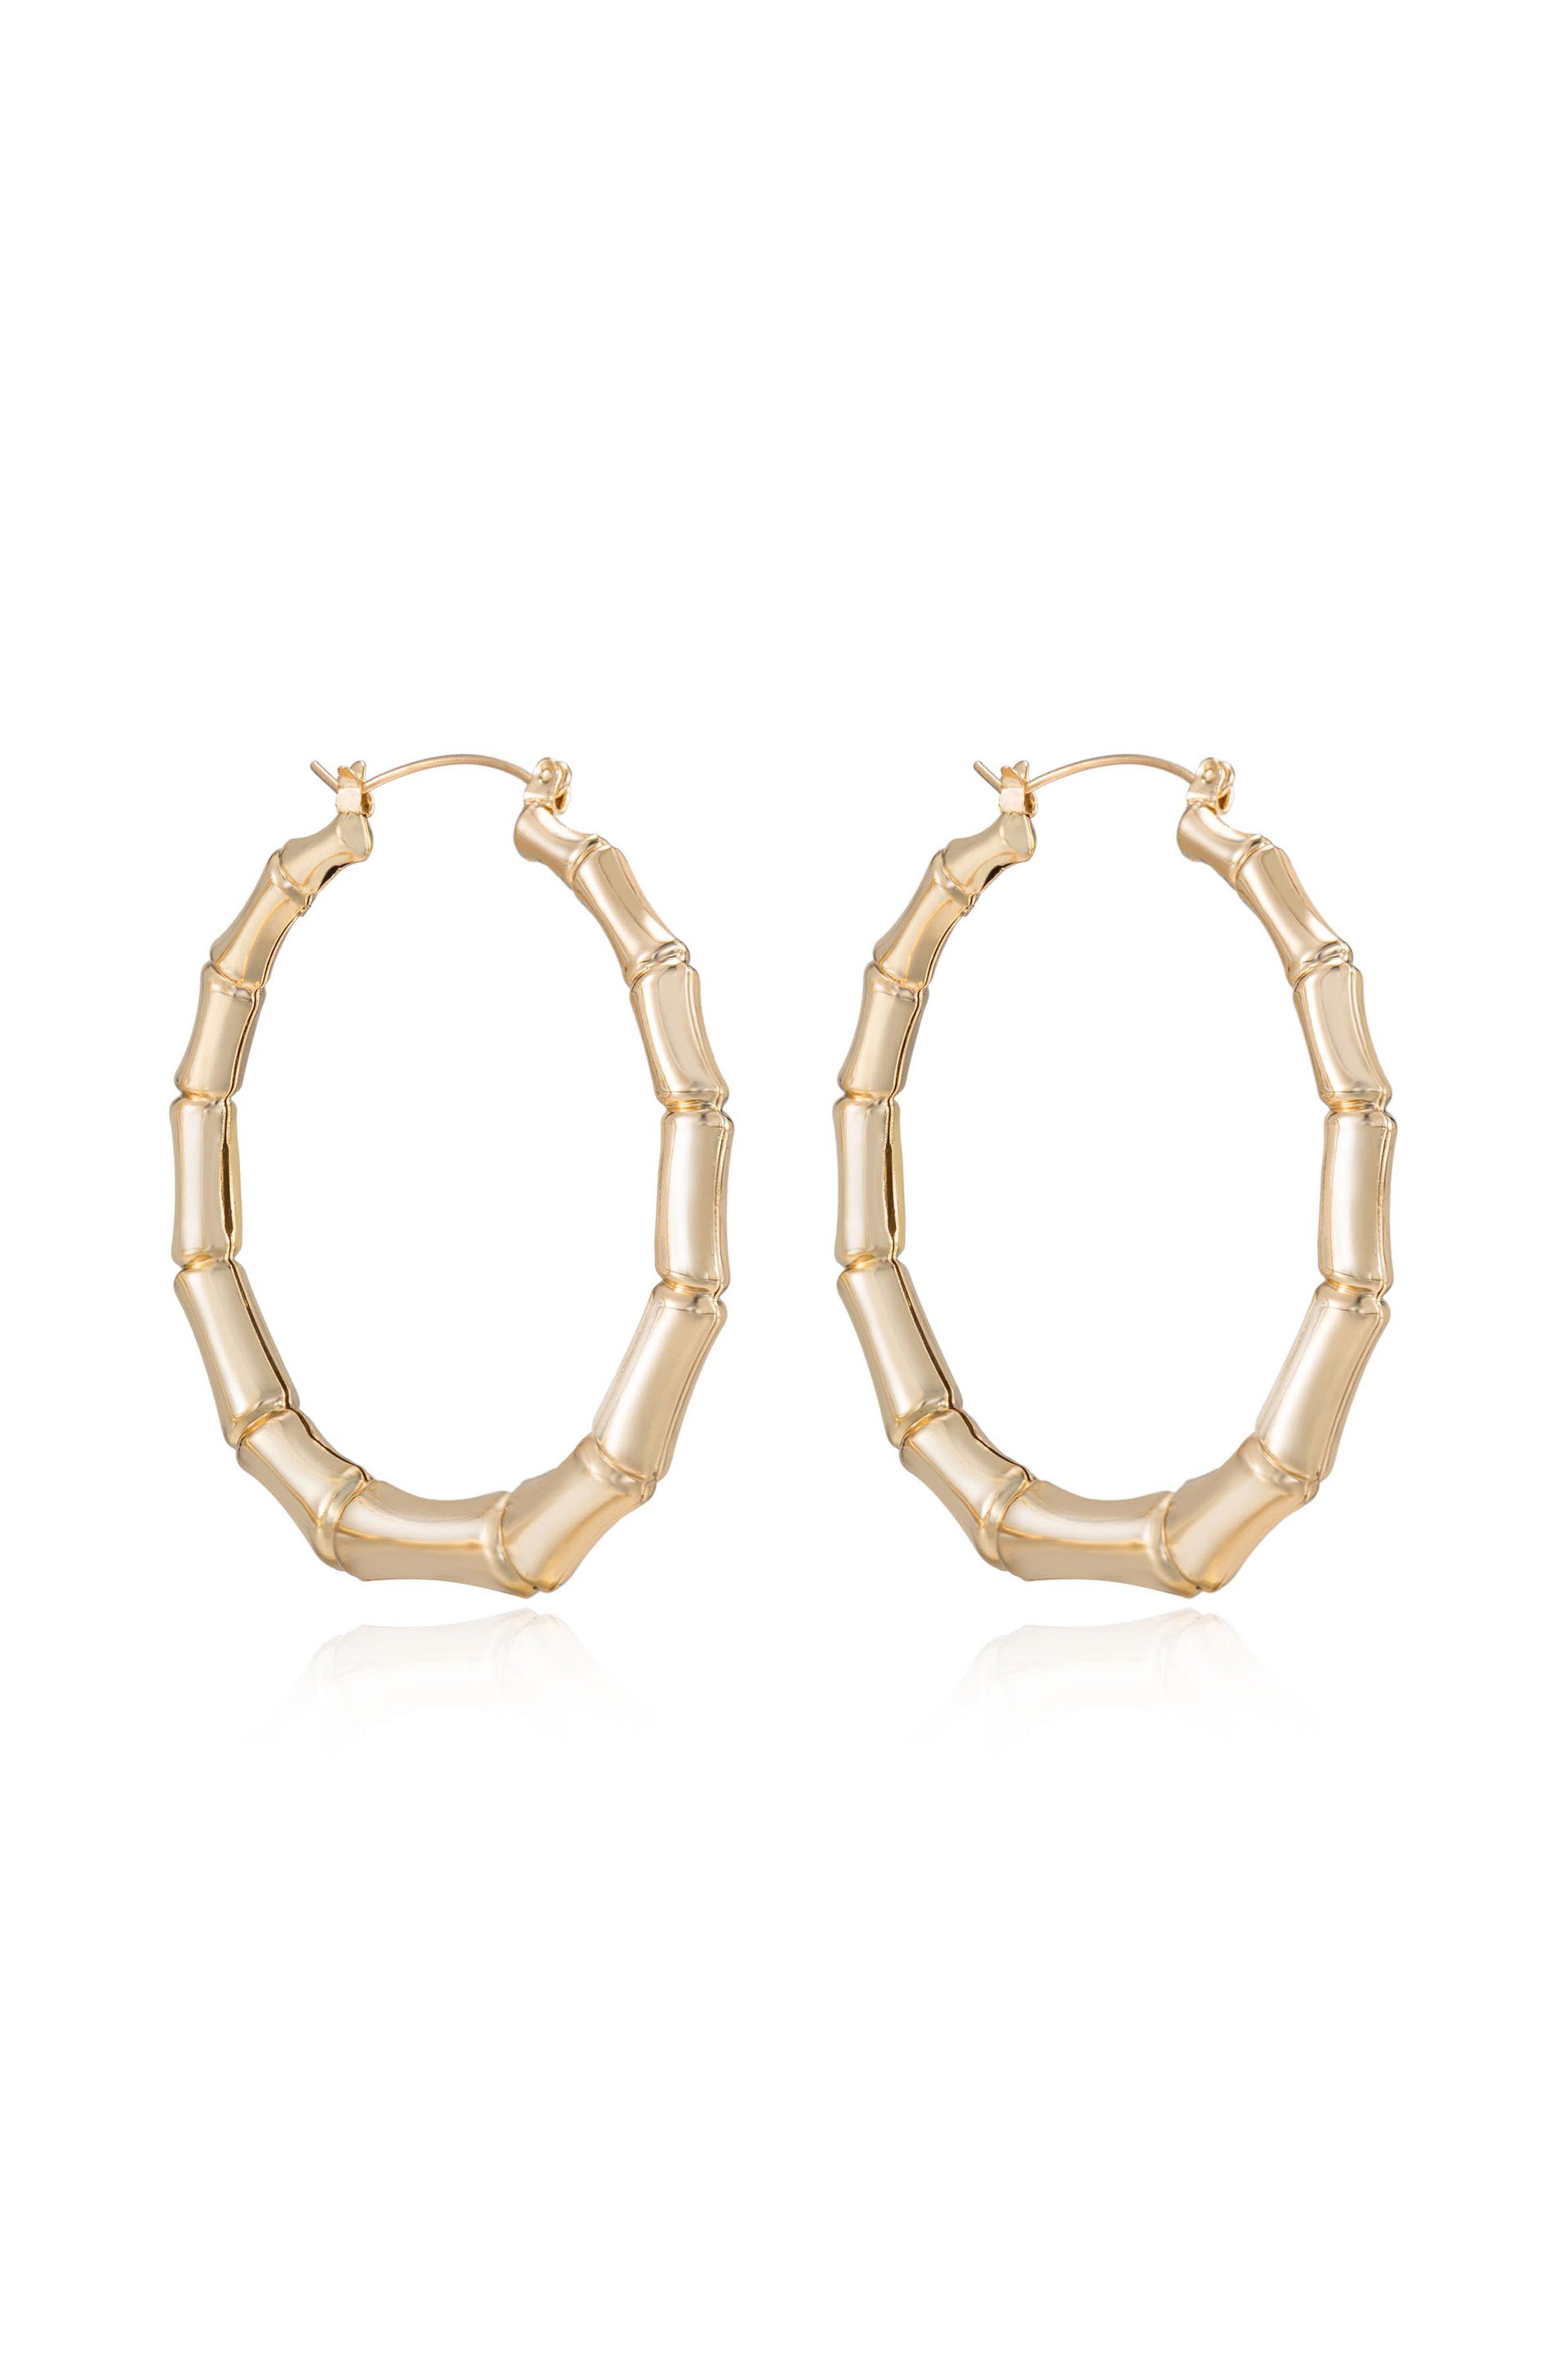 18K Gold Layered Chunk Bamboo Hoop Earrings Wholesale Jewelry Supplies 45mm